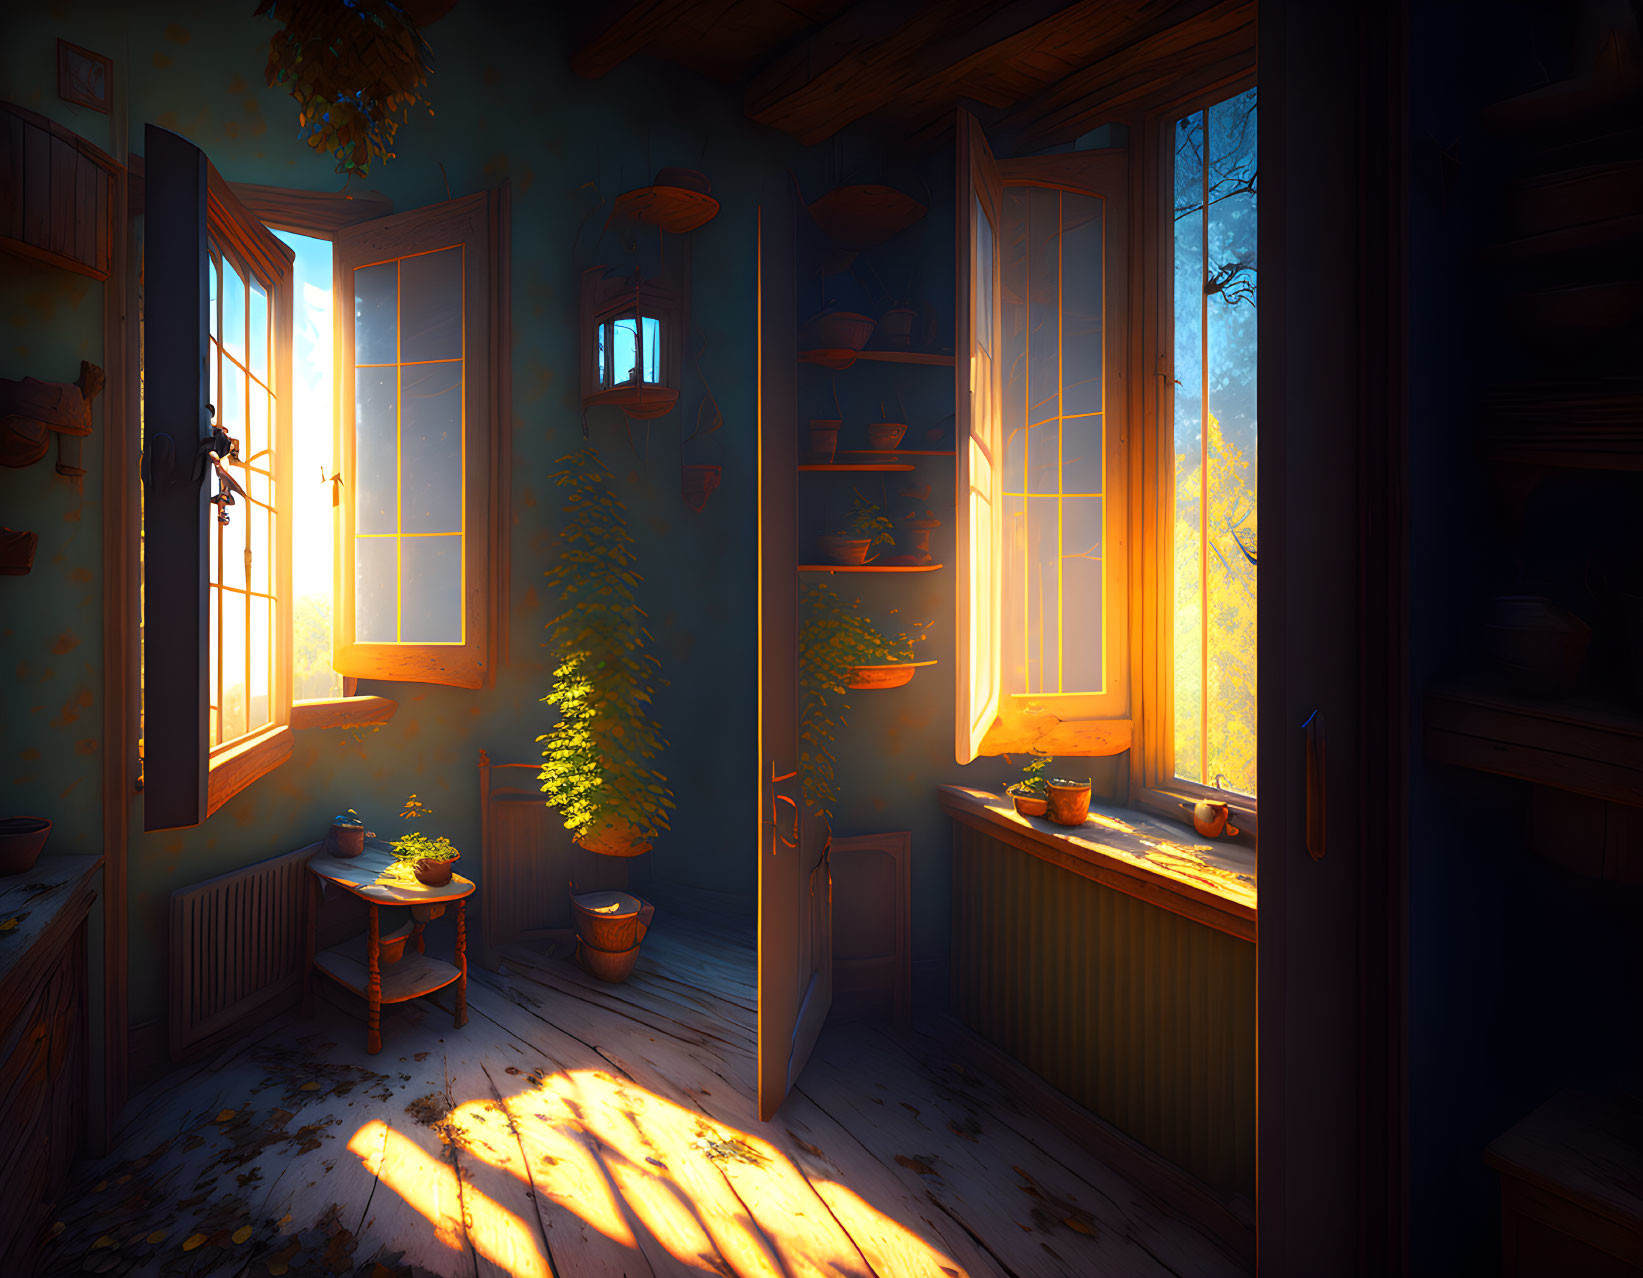 Rustic wooden cabin interior with sunlight, plants, and pottery